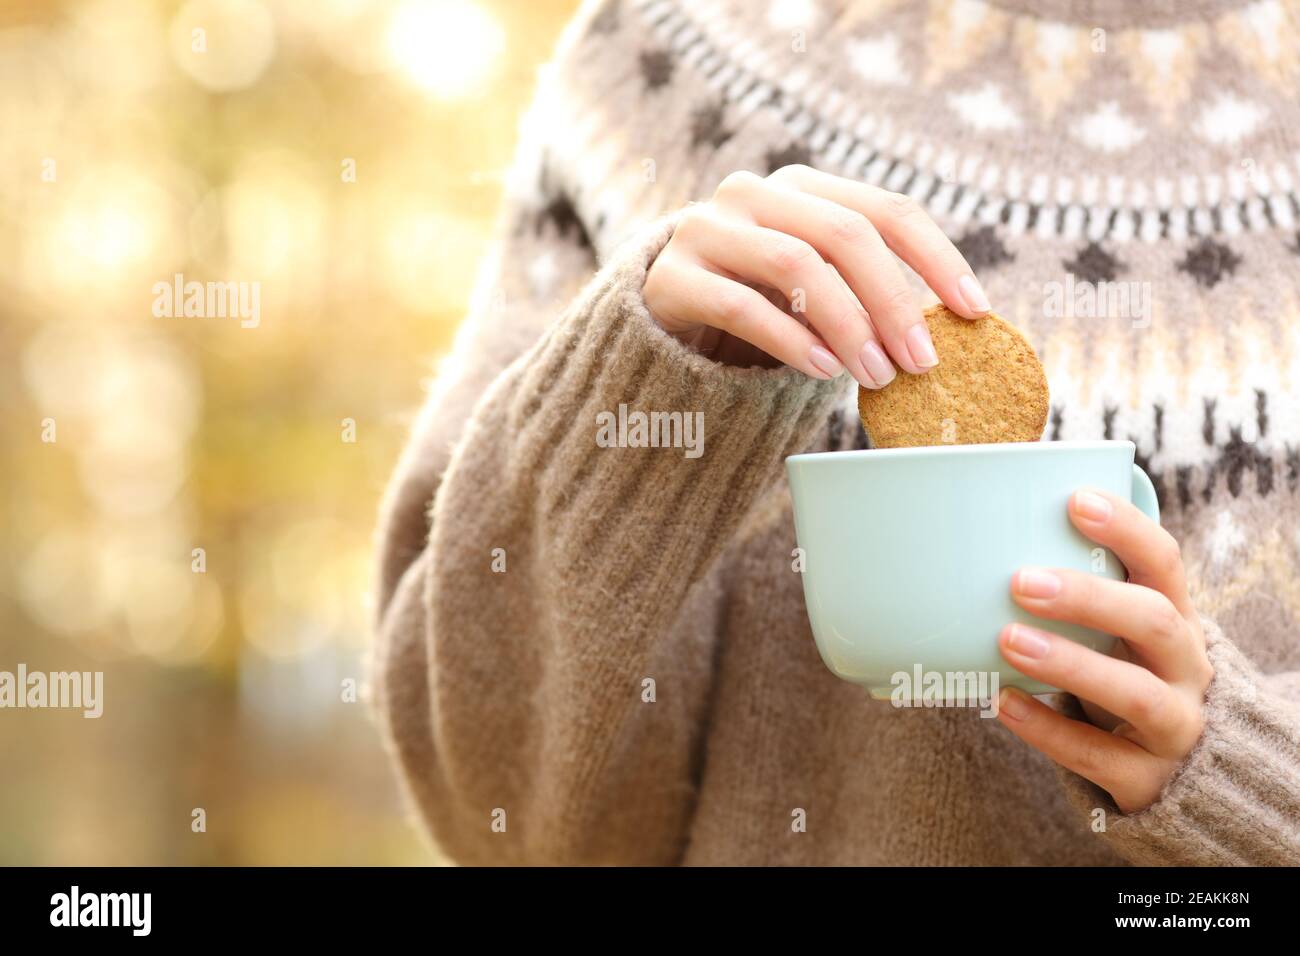 Woman dipping cookie in a coffee mug in autumn Stock Photo